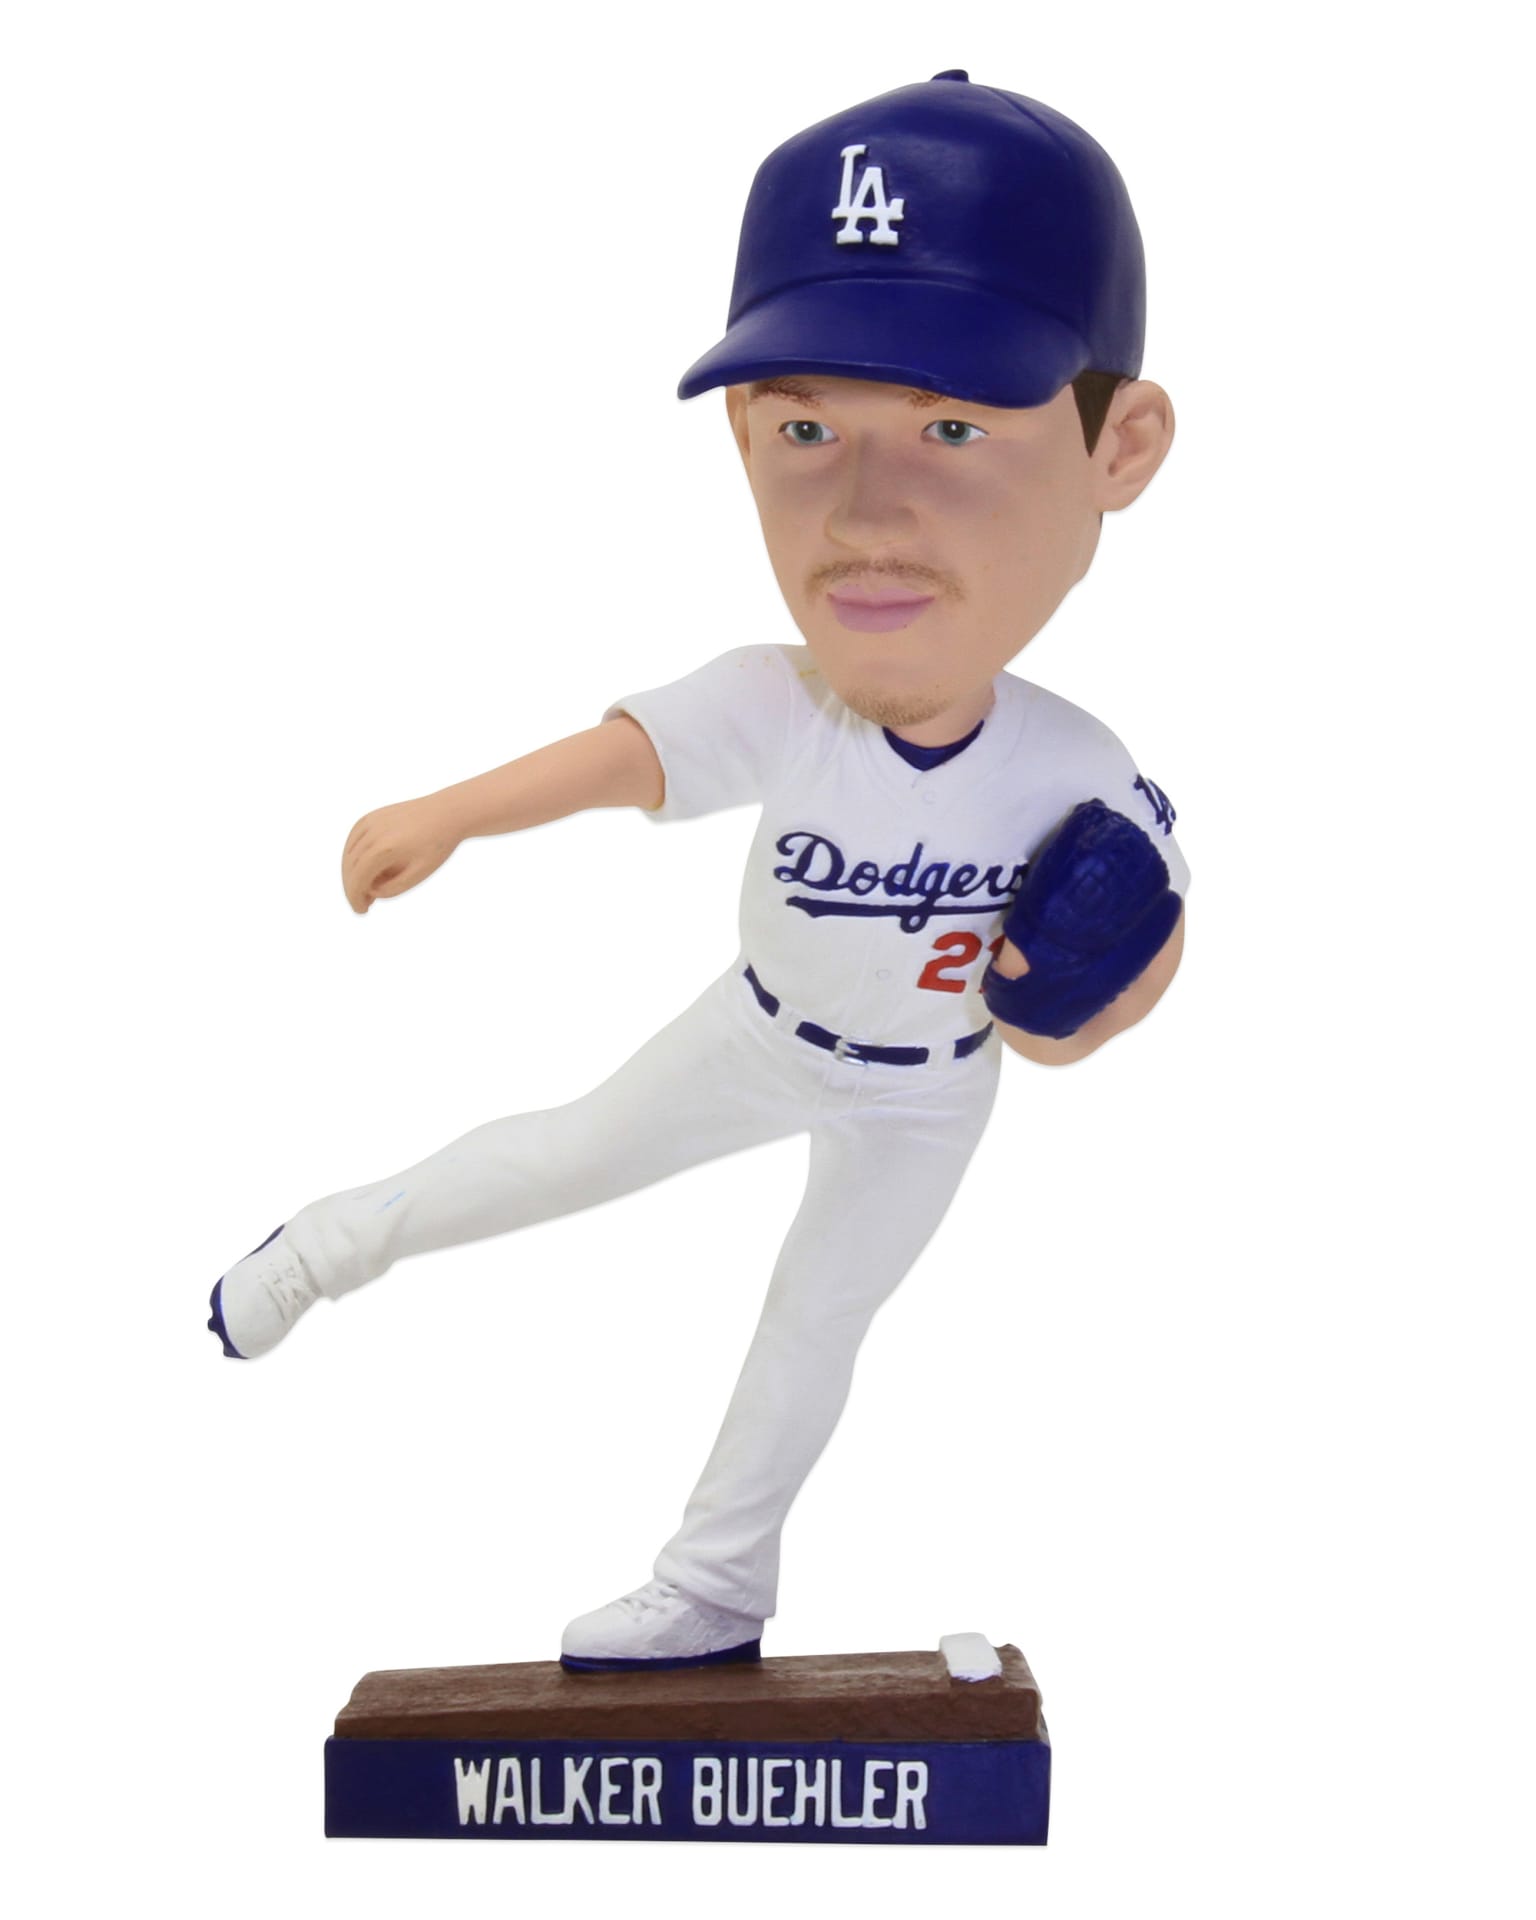 Dodgers Bobbleheads: FOCO 'City Connect' Collection Features Kershaw,  Betts, Urias & More